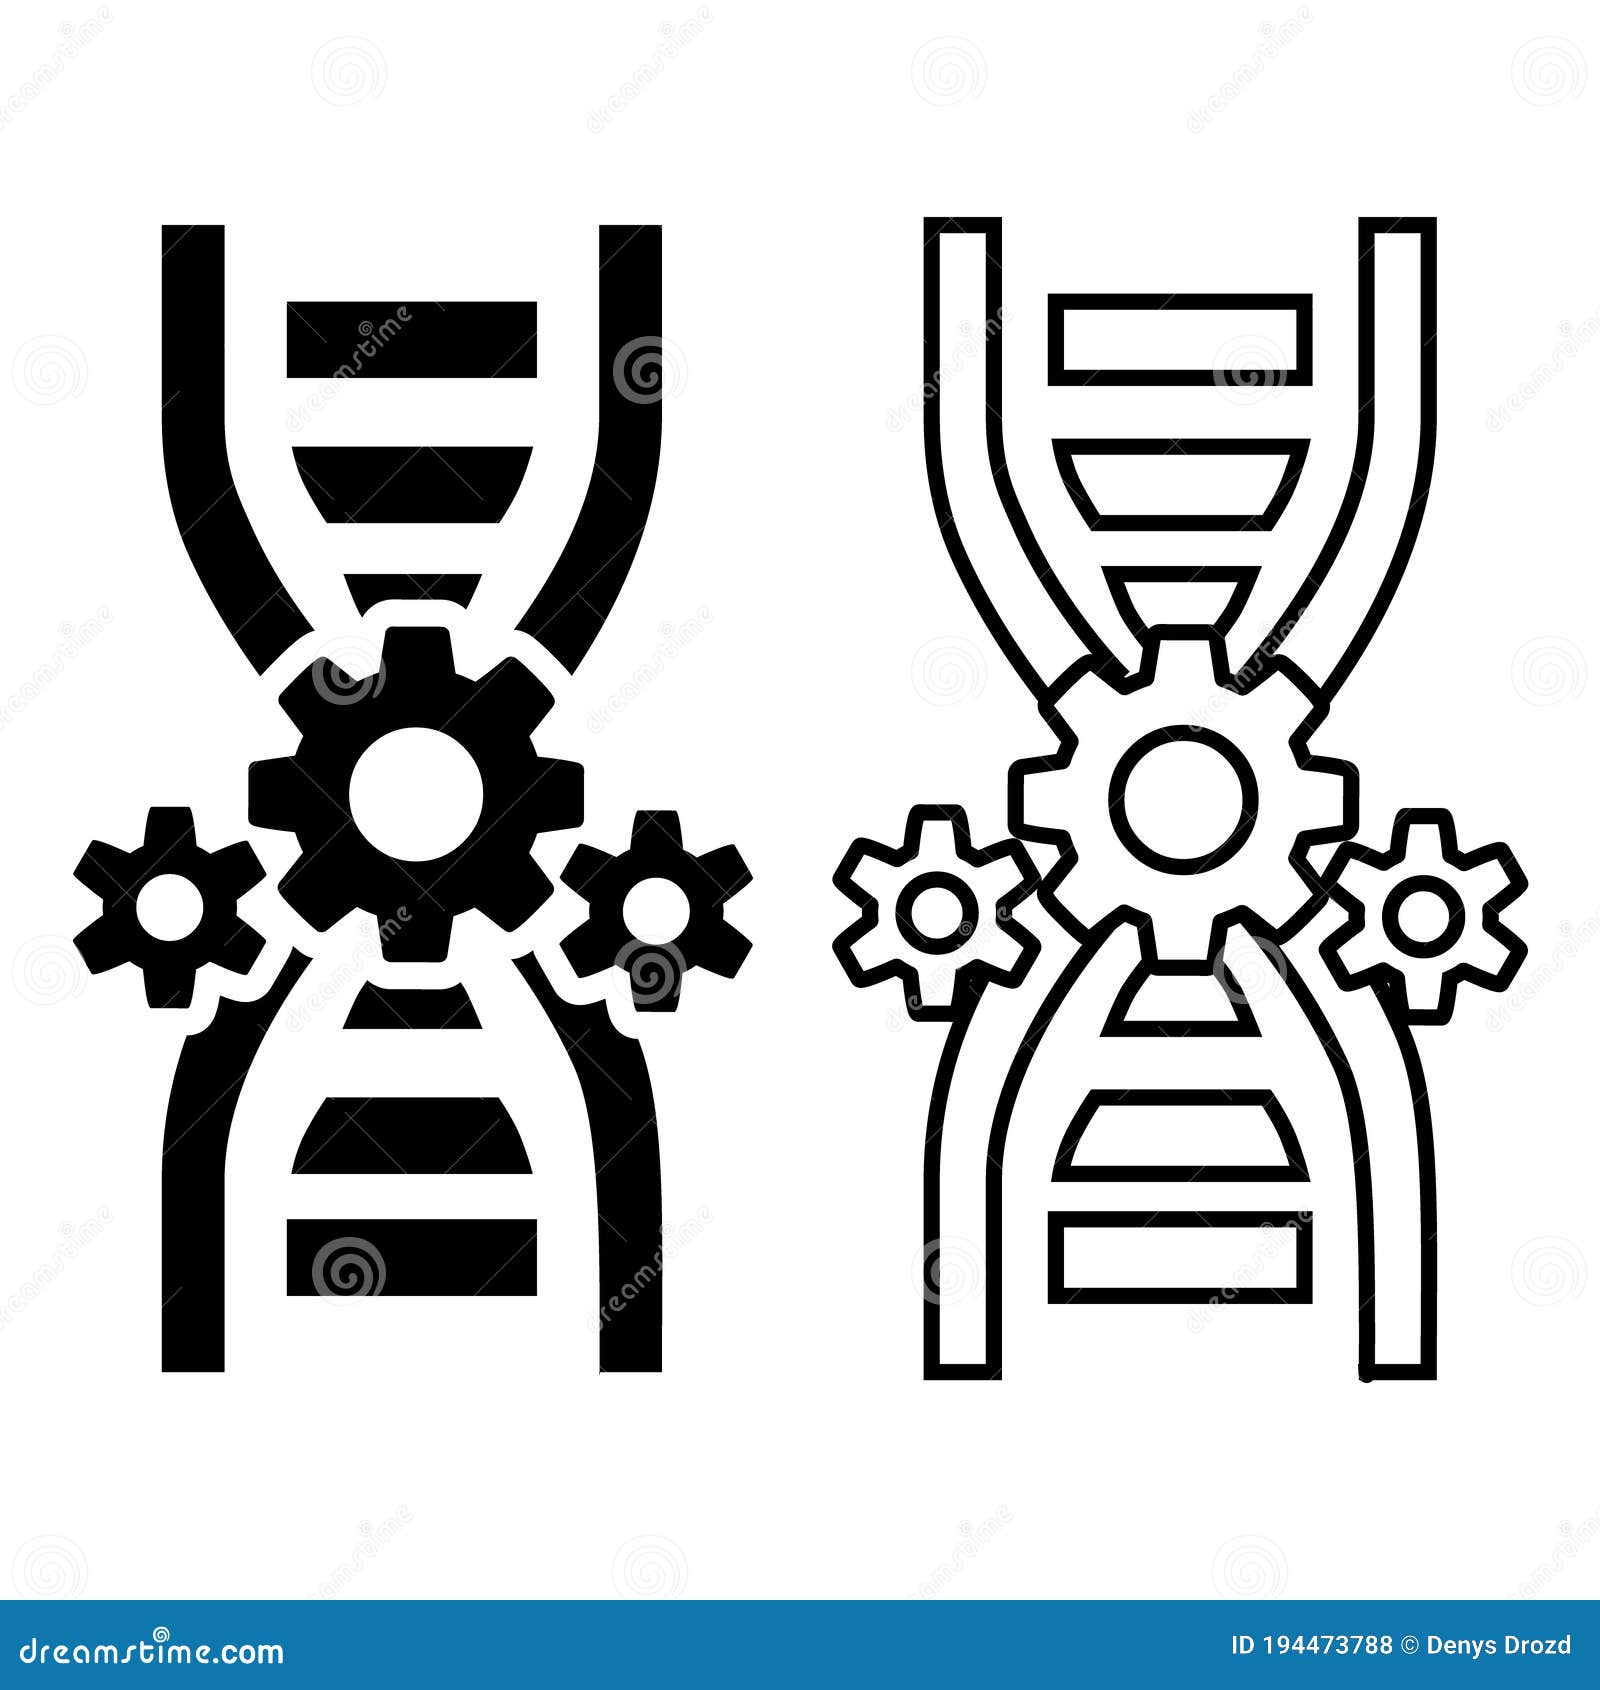 biomedical engineering clipart icons